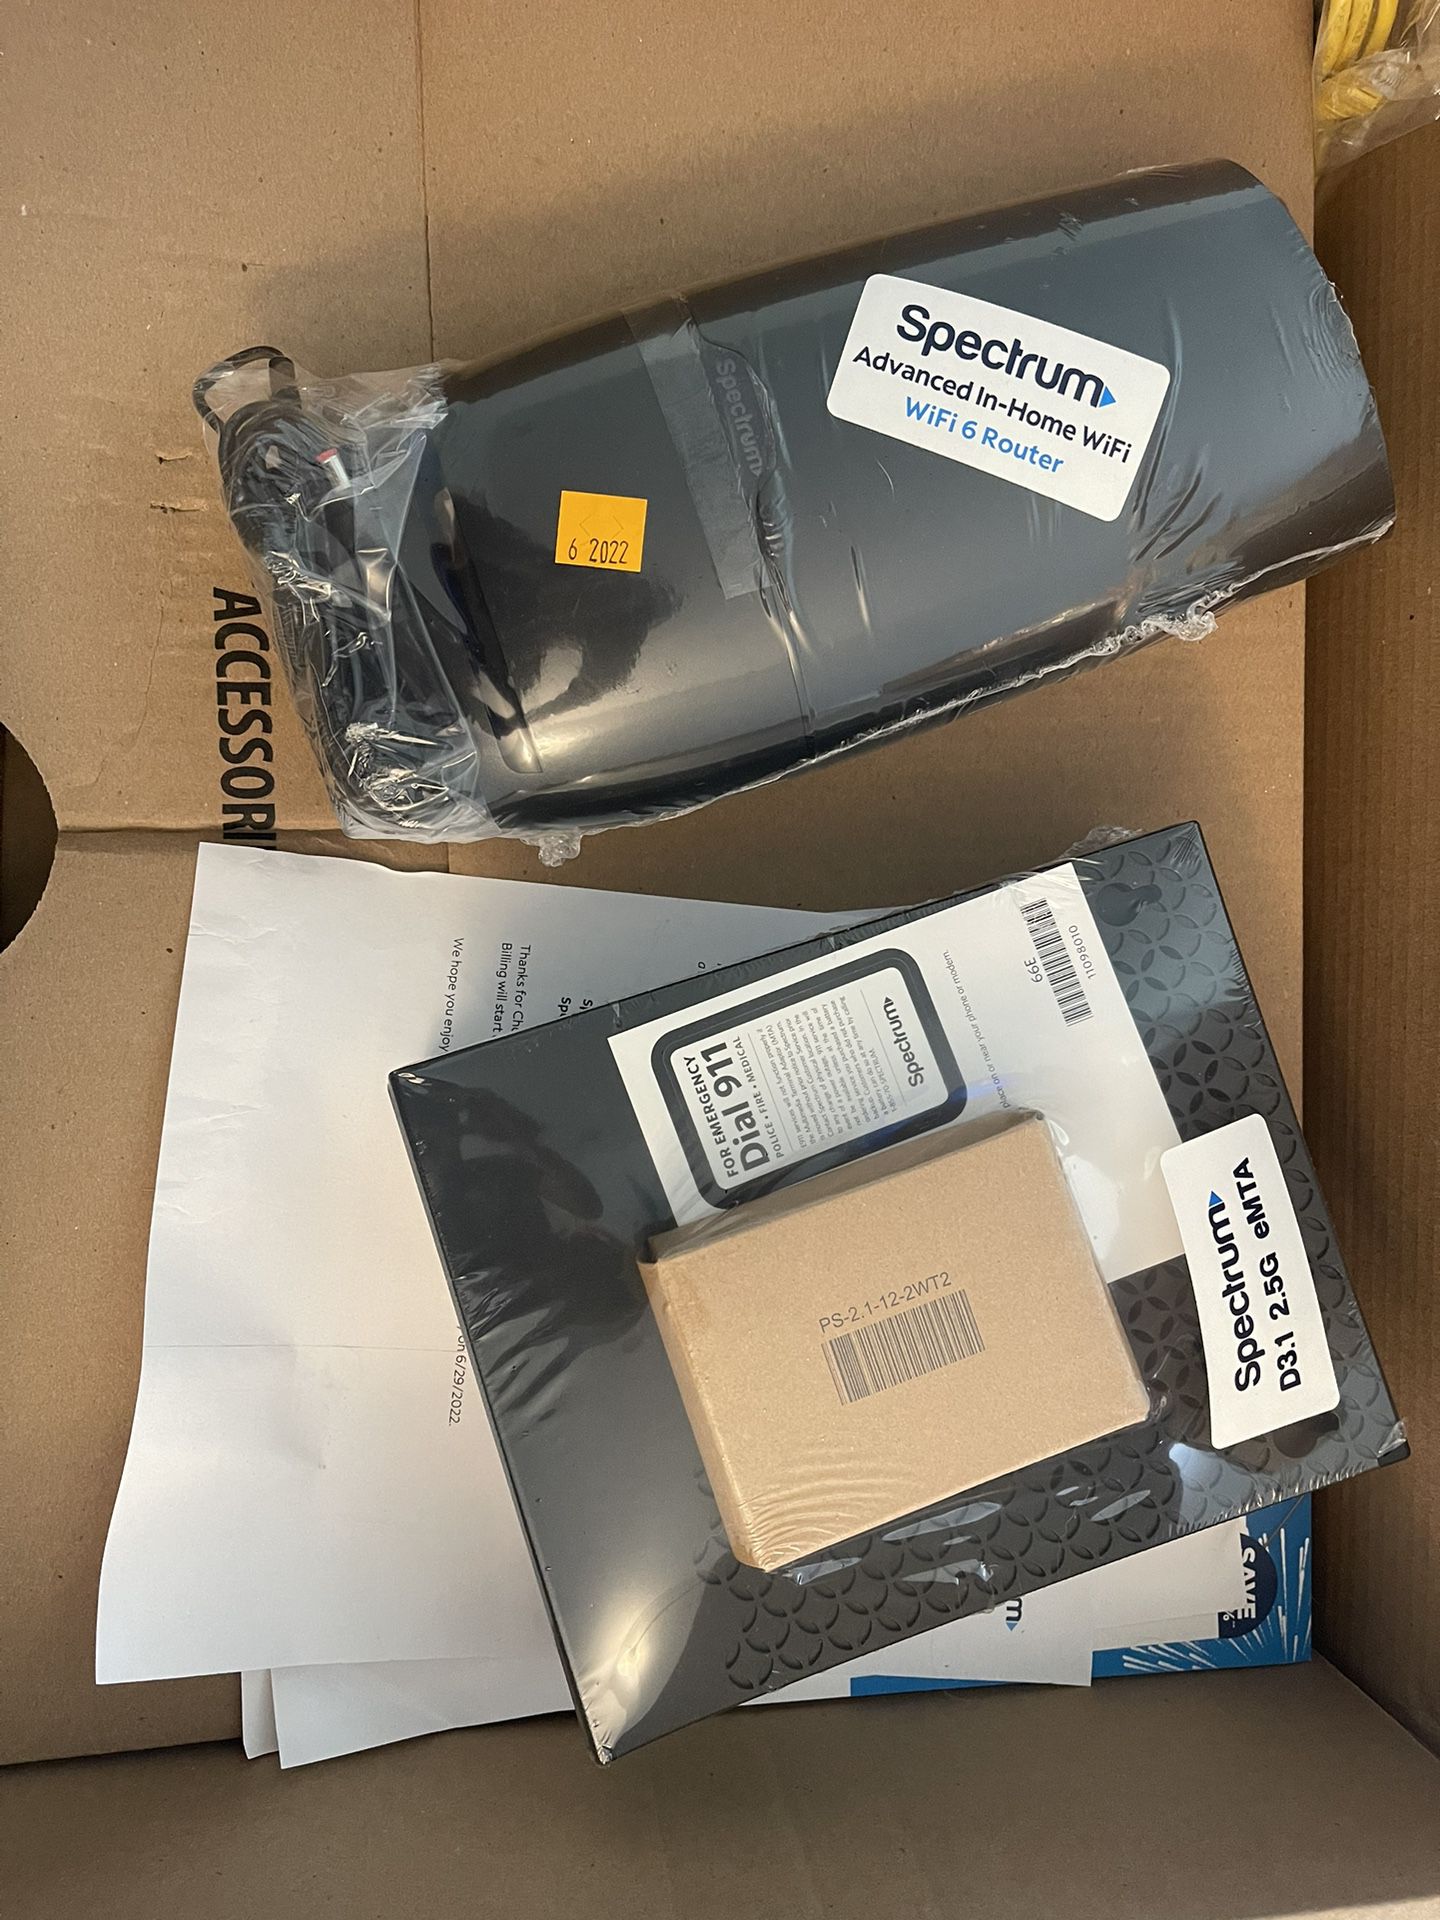 Spectrum Modem And WiFi Router